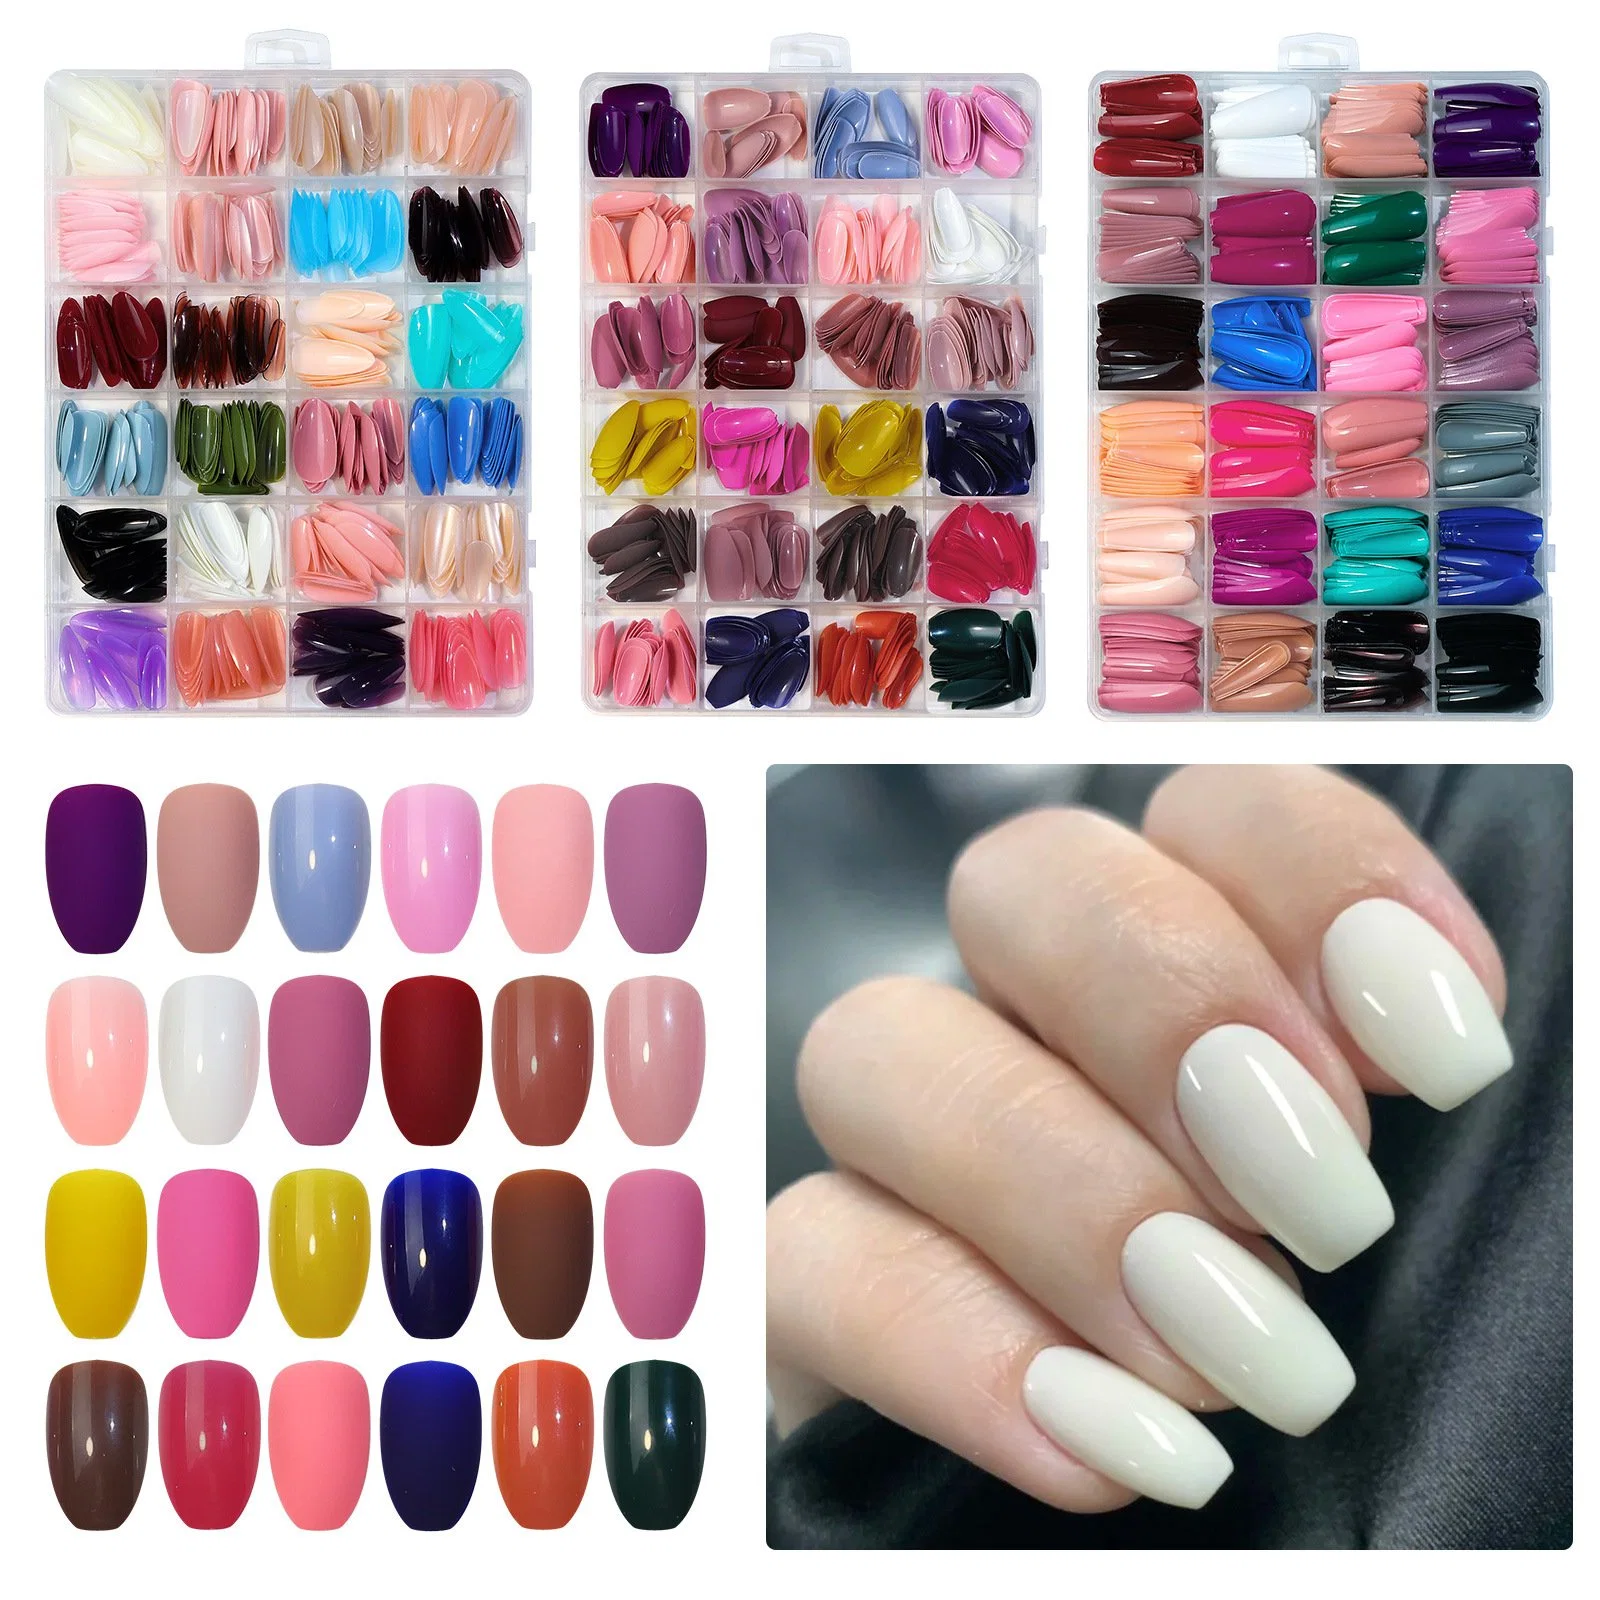 24 Colours Candy Colors French False Nail Tips Rainbow Color Artificial Fake Nail Art Beauty Manicure Makeup Tools Art Nail